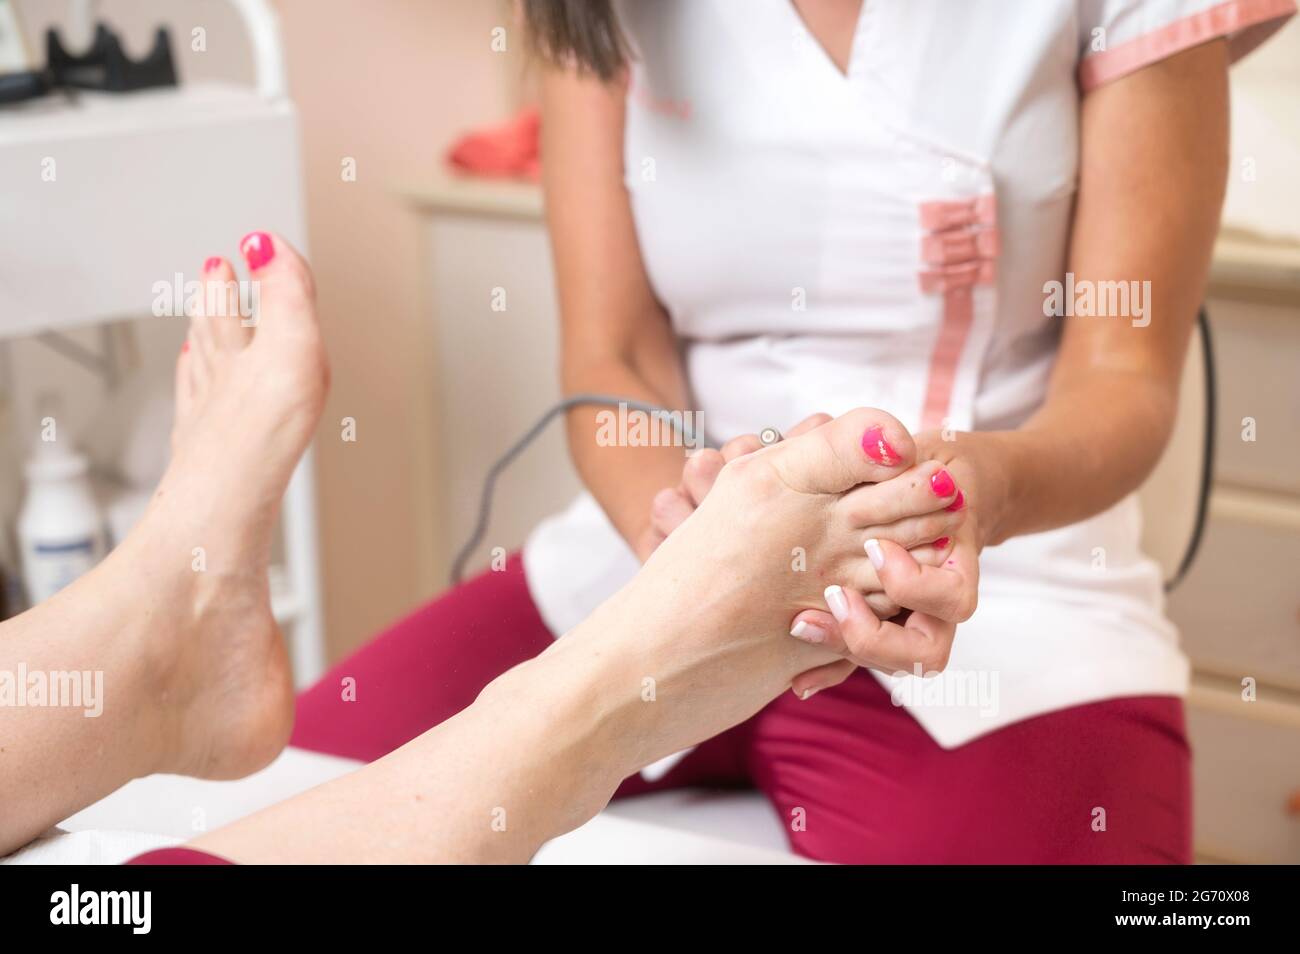 Medicinal Pedicure. The Doctor Removes The Imprint On The Foot With A  Scalpel Stock Photo, Picture and Royalty Free Image. Image 76932829.